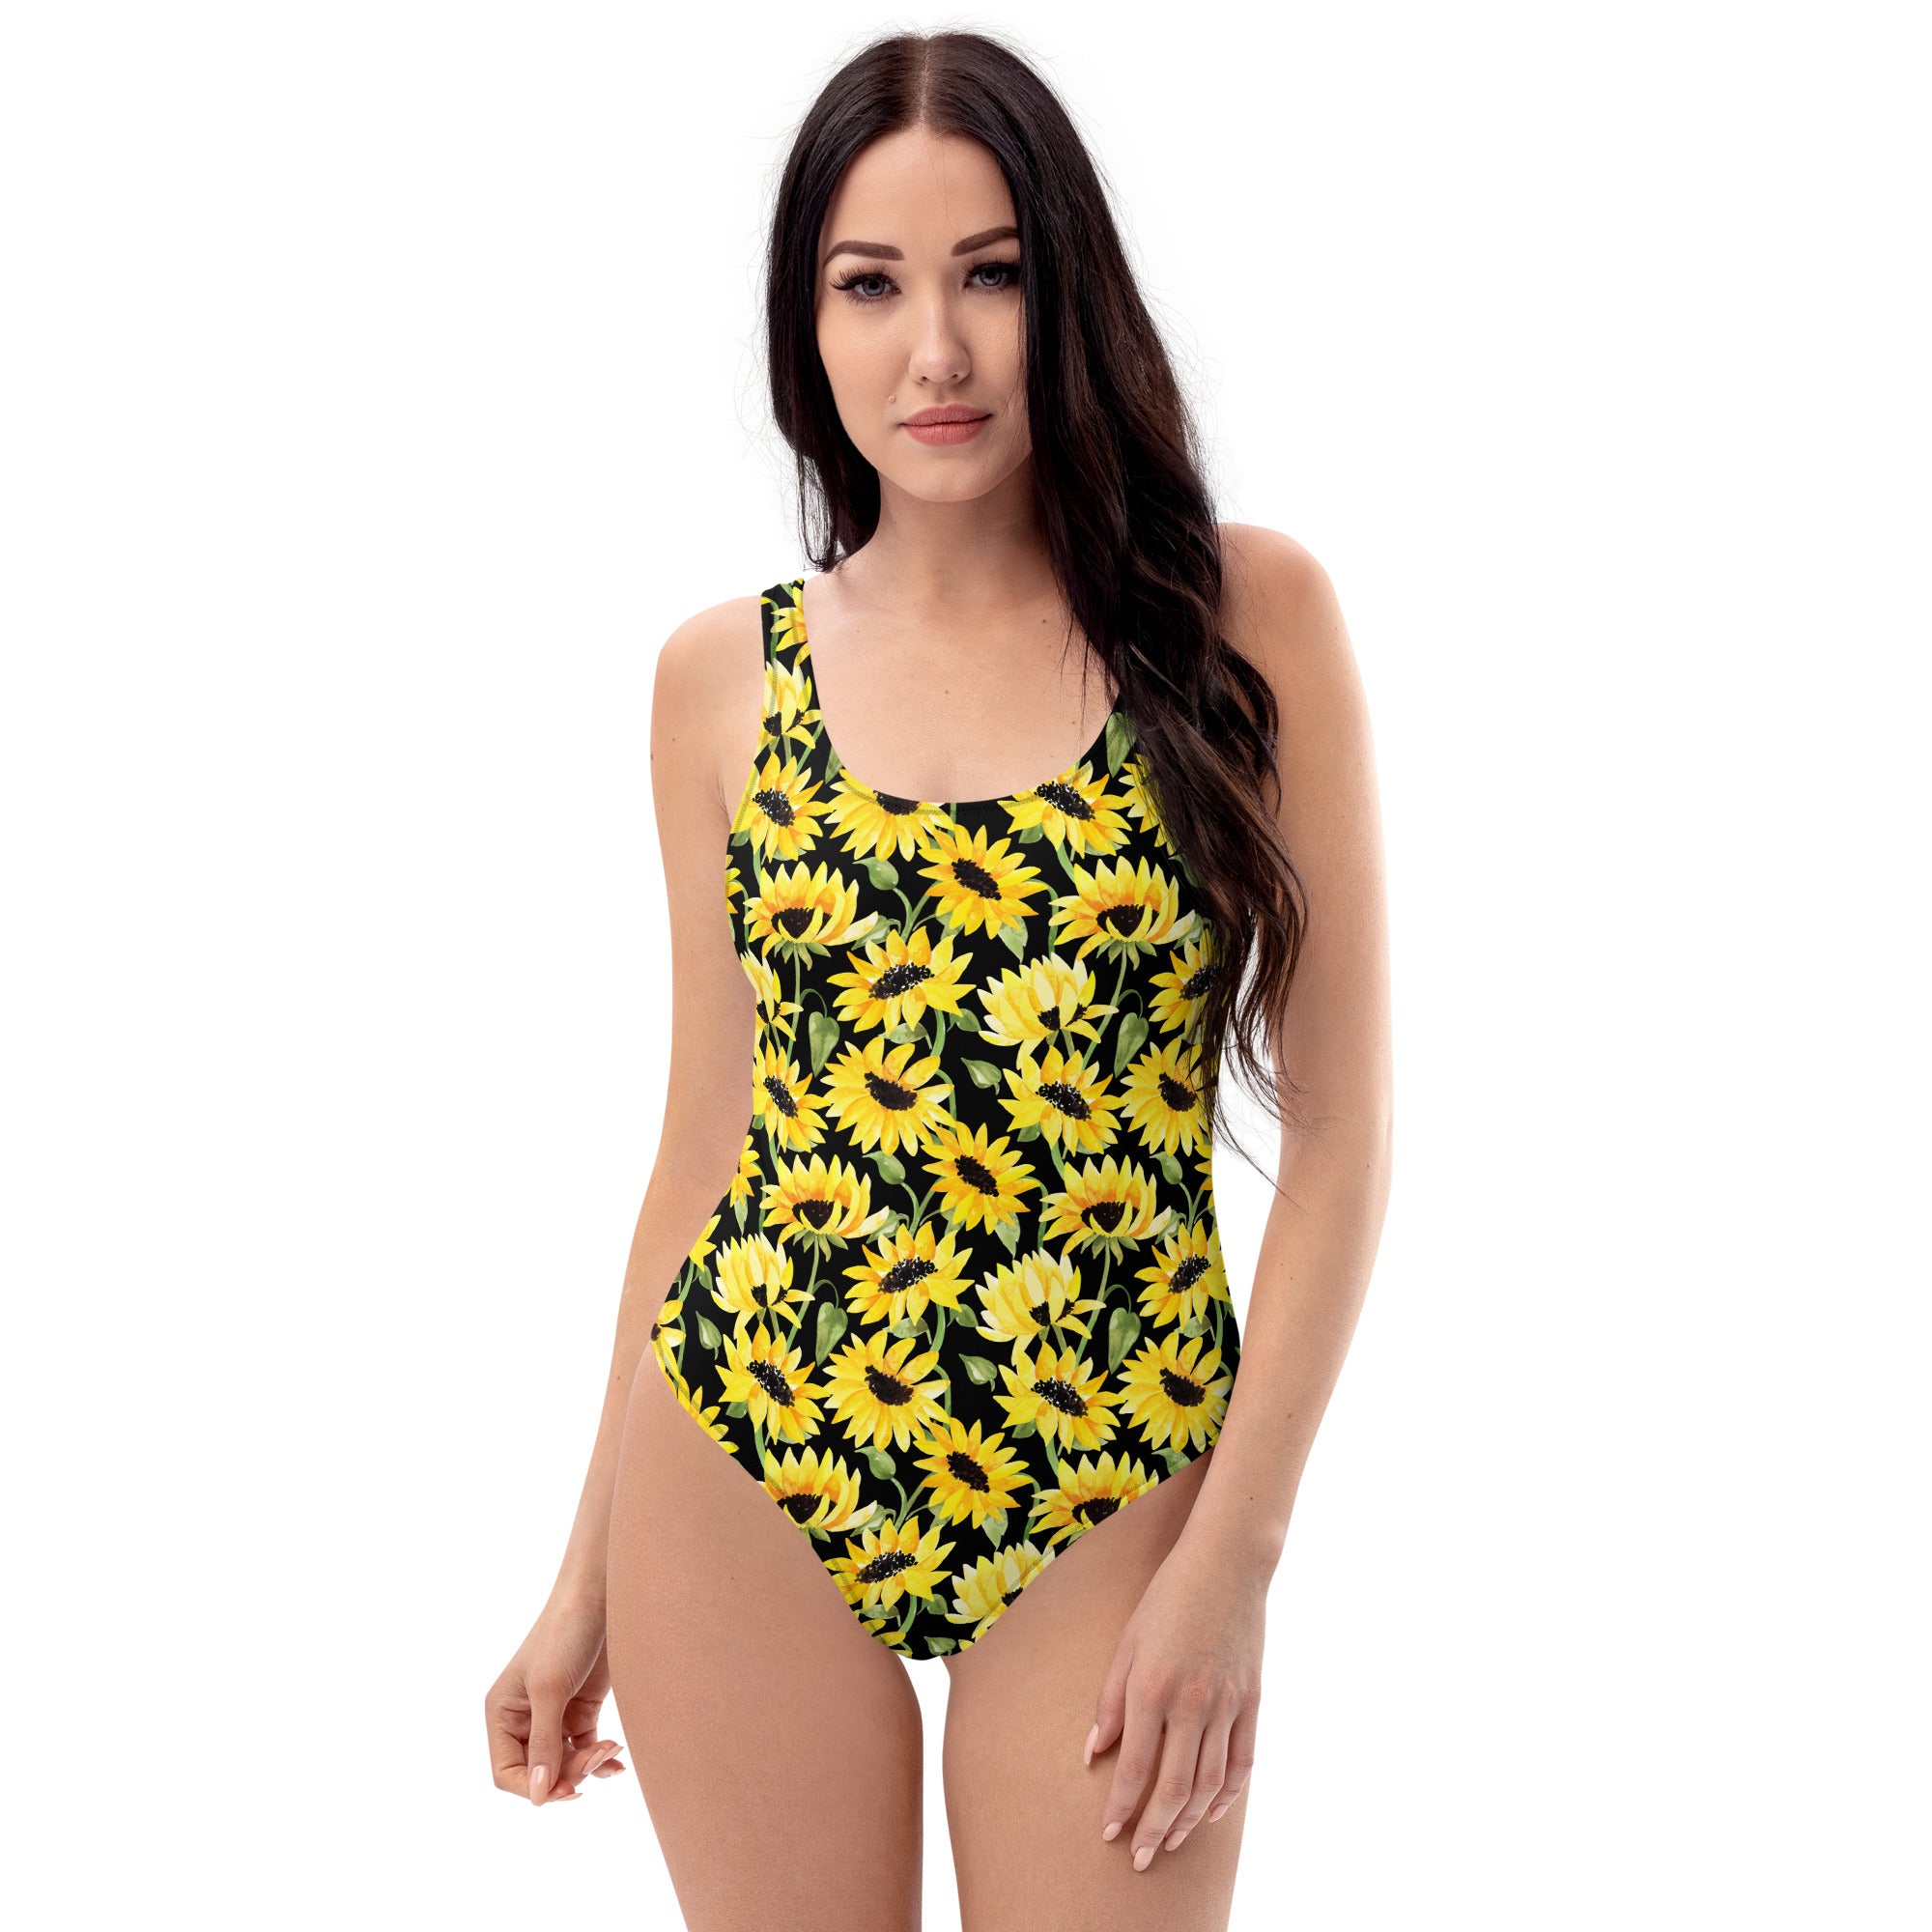 2020's Best Sunflower Print Clothing For Women - Sunflower Hollow Out  One-Piece Swimsuit